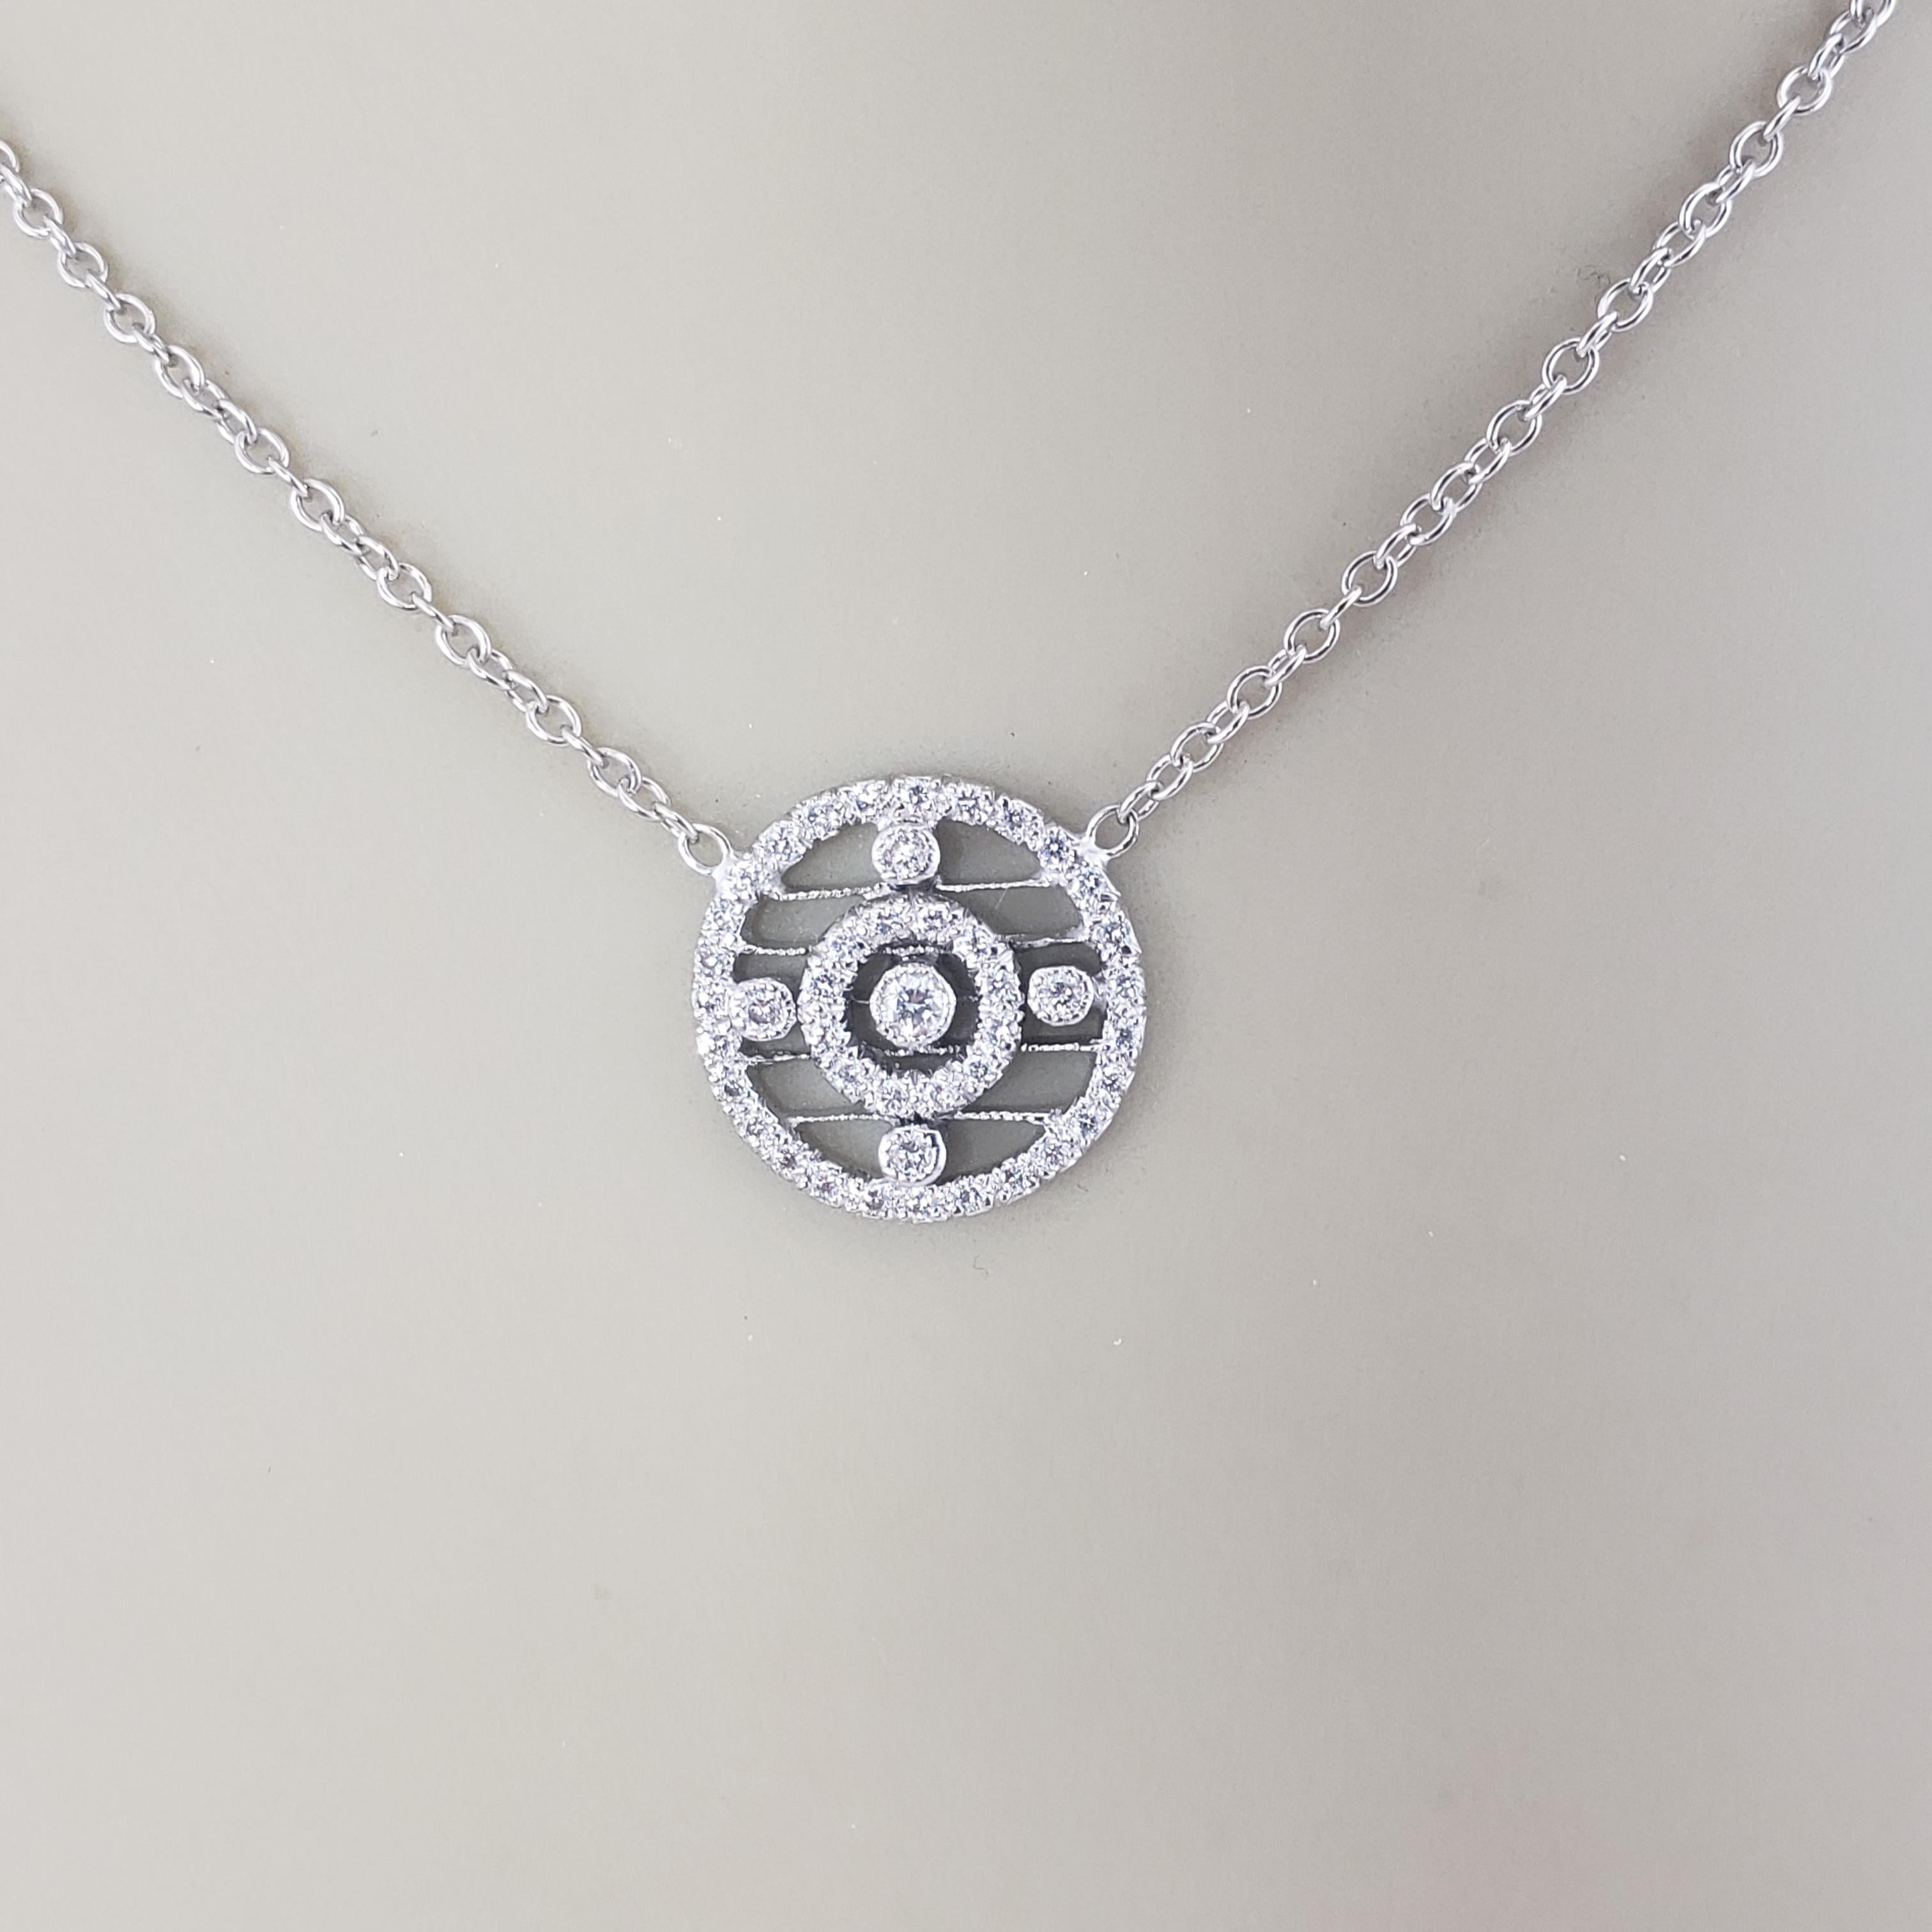 18 Karat White Gold and Diamond Circle Pendant Necklace #16824 For Sale 2